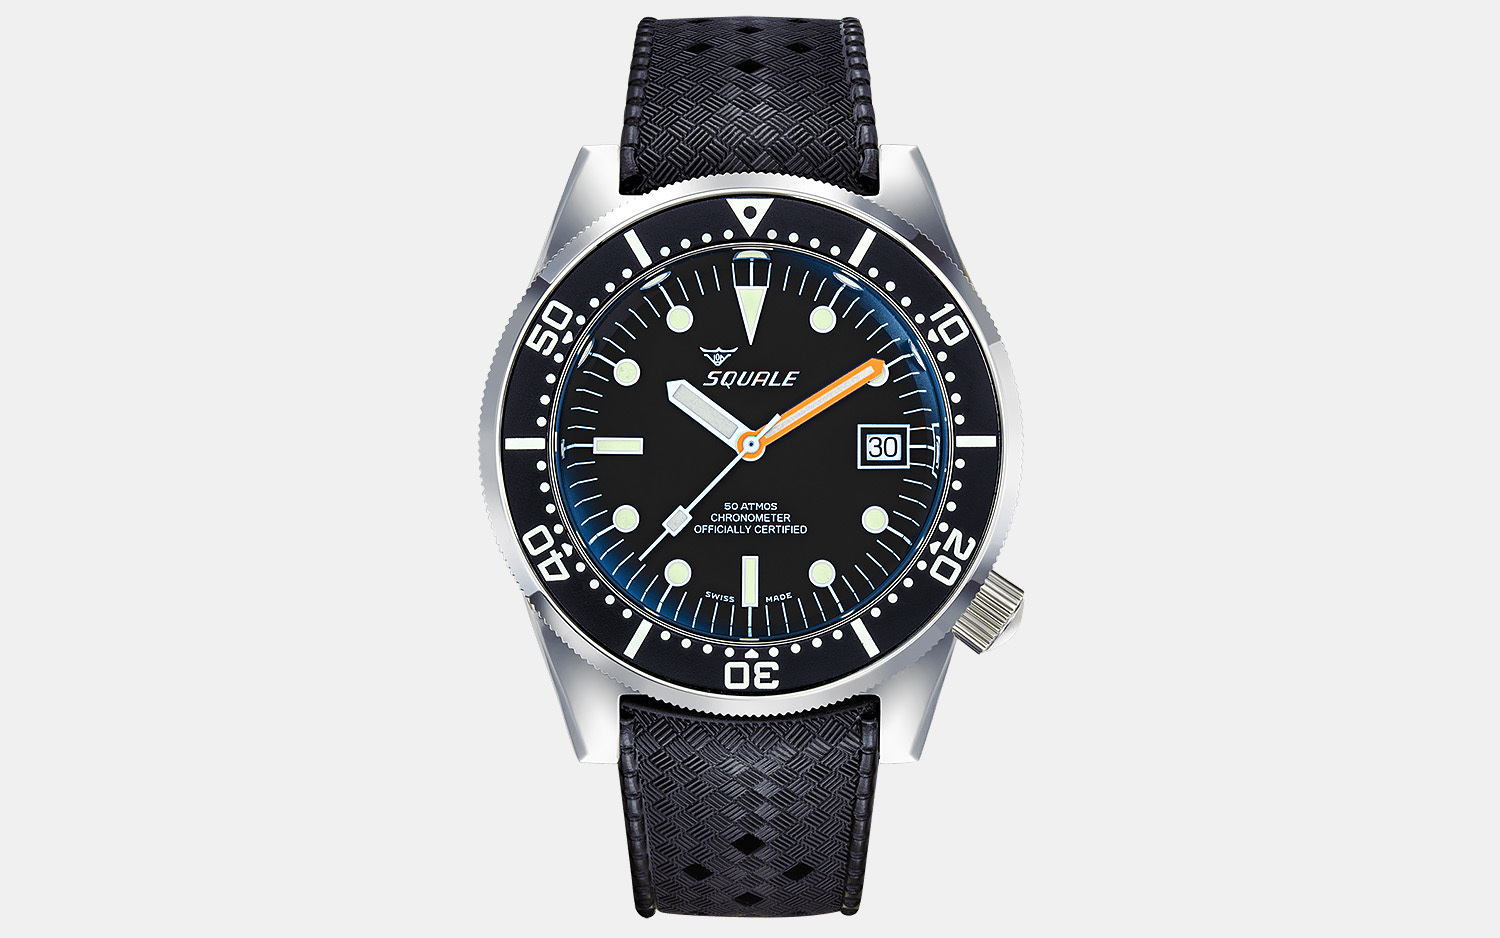 Squale 1521 Classic COSC Certified Chronometer